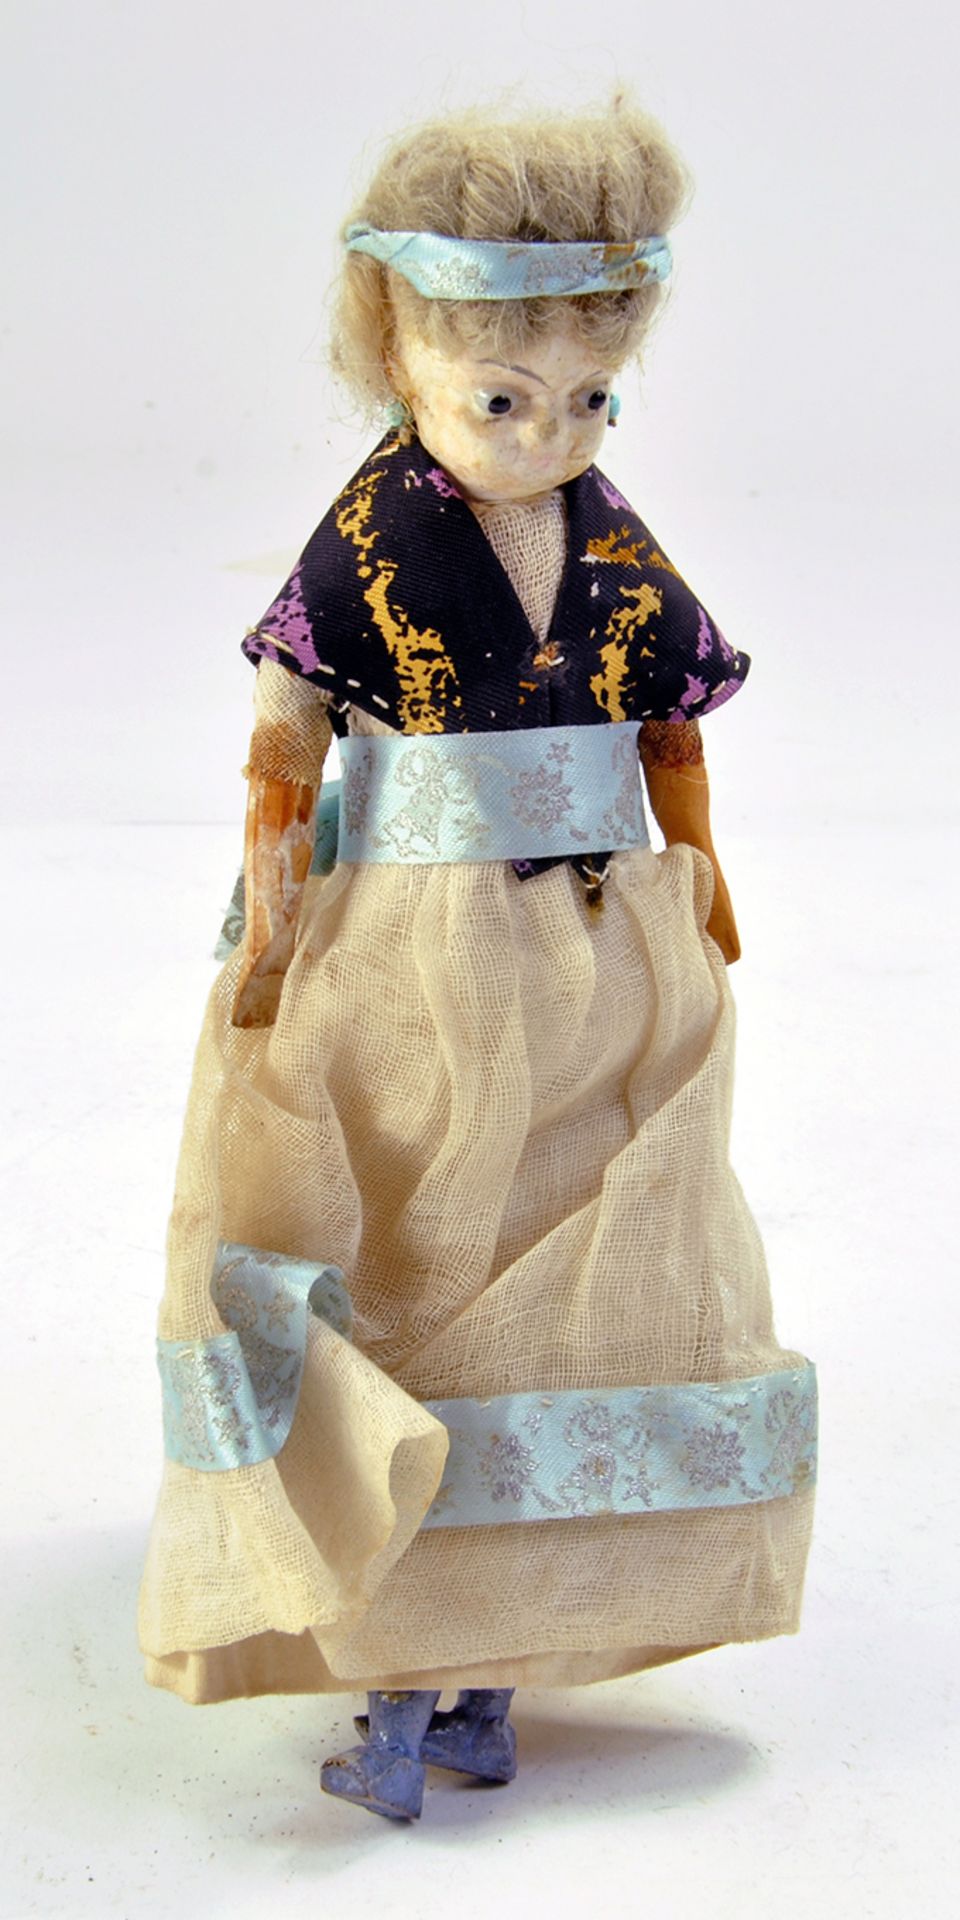 Antique Doll, relatively well preserved 1800's Wax / Papier Mache German Composition Head figure,